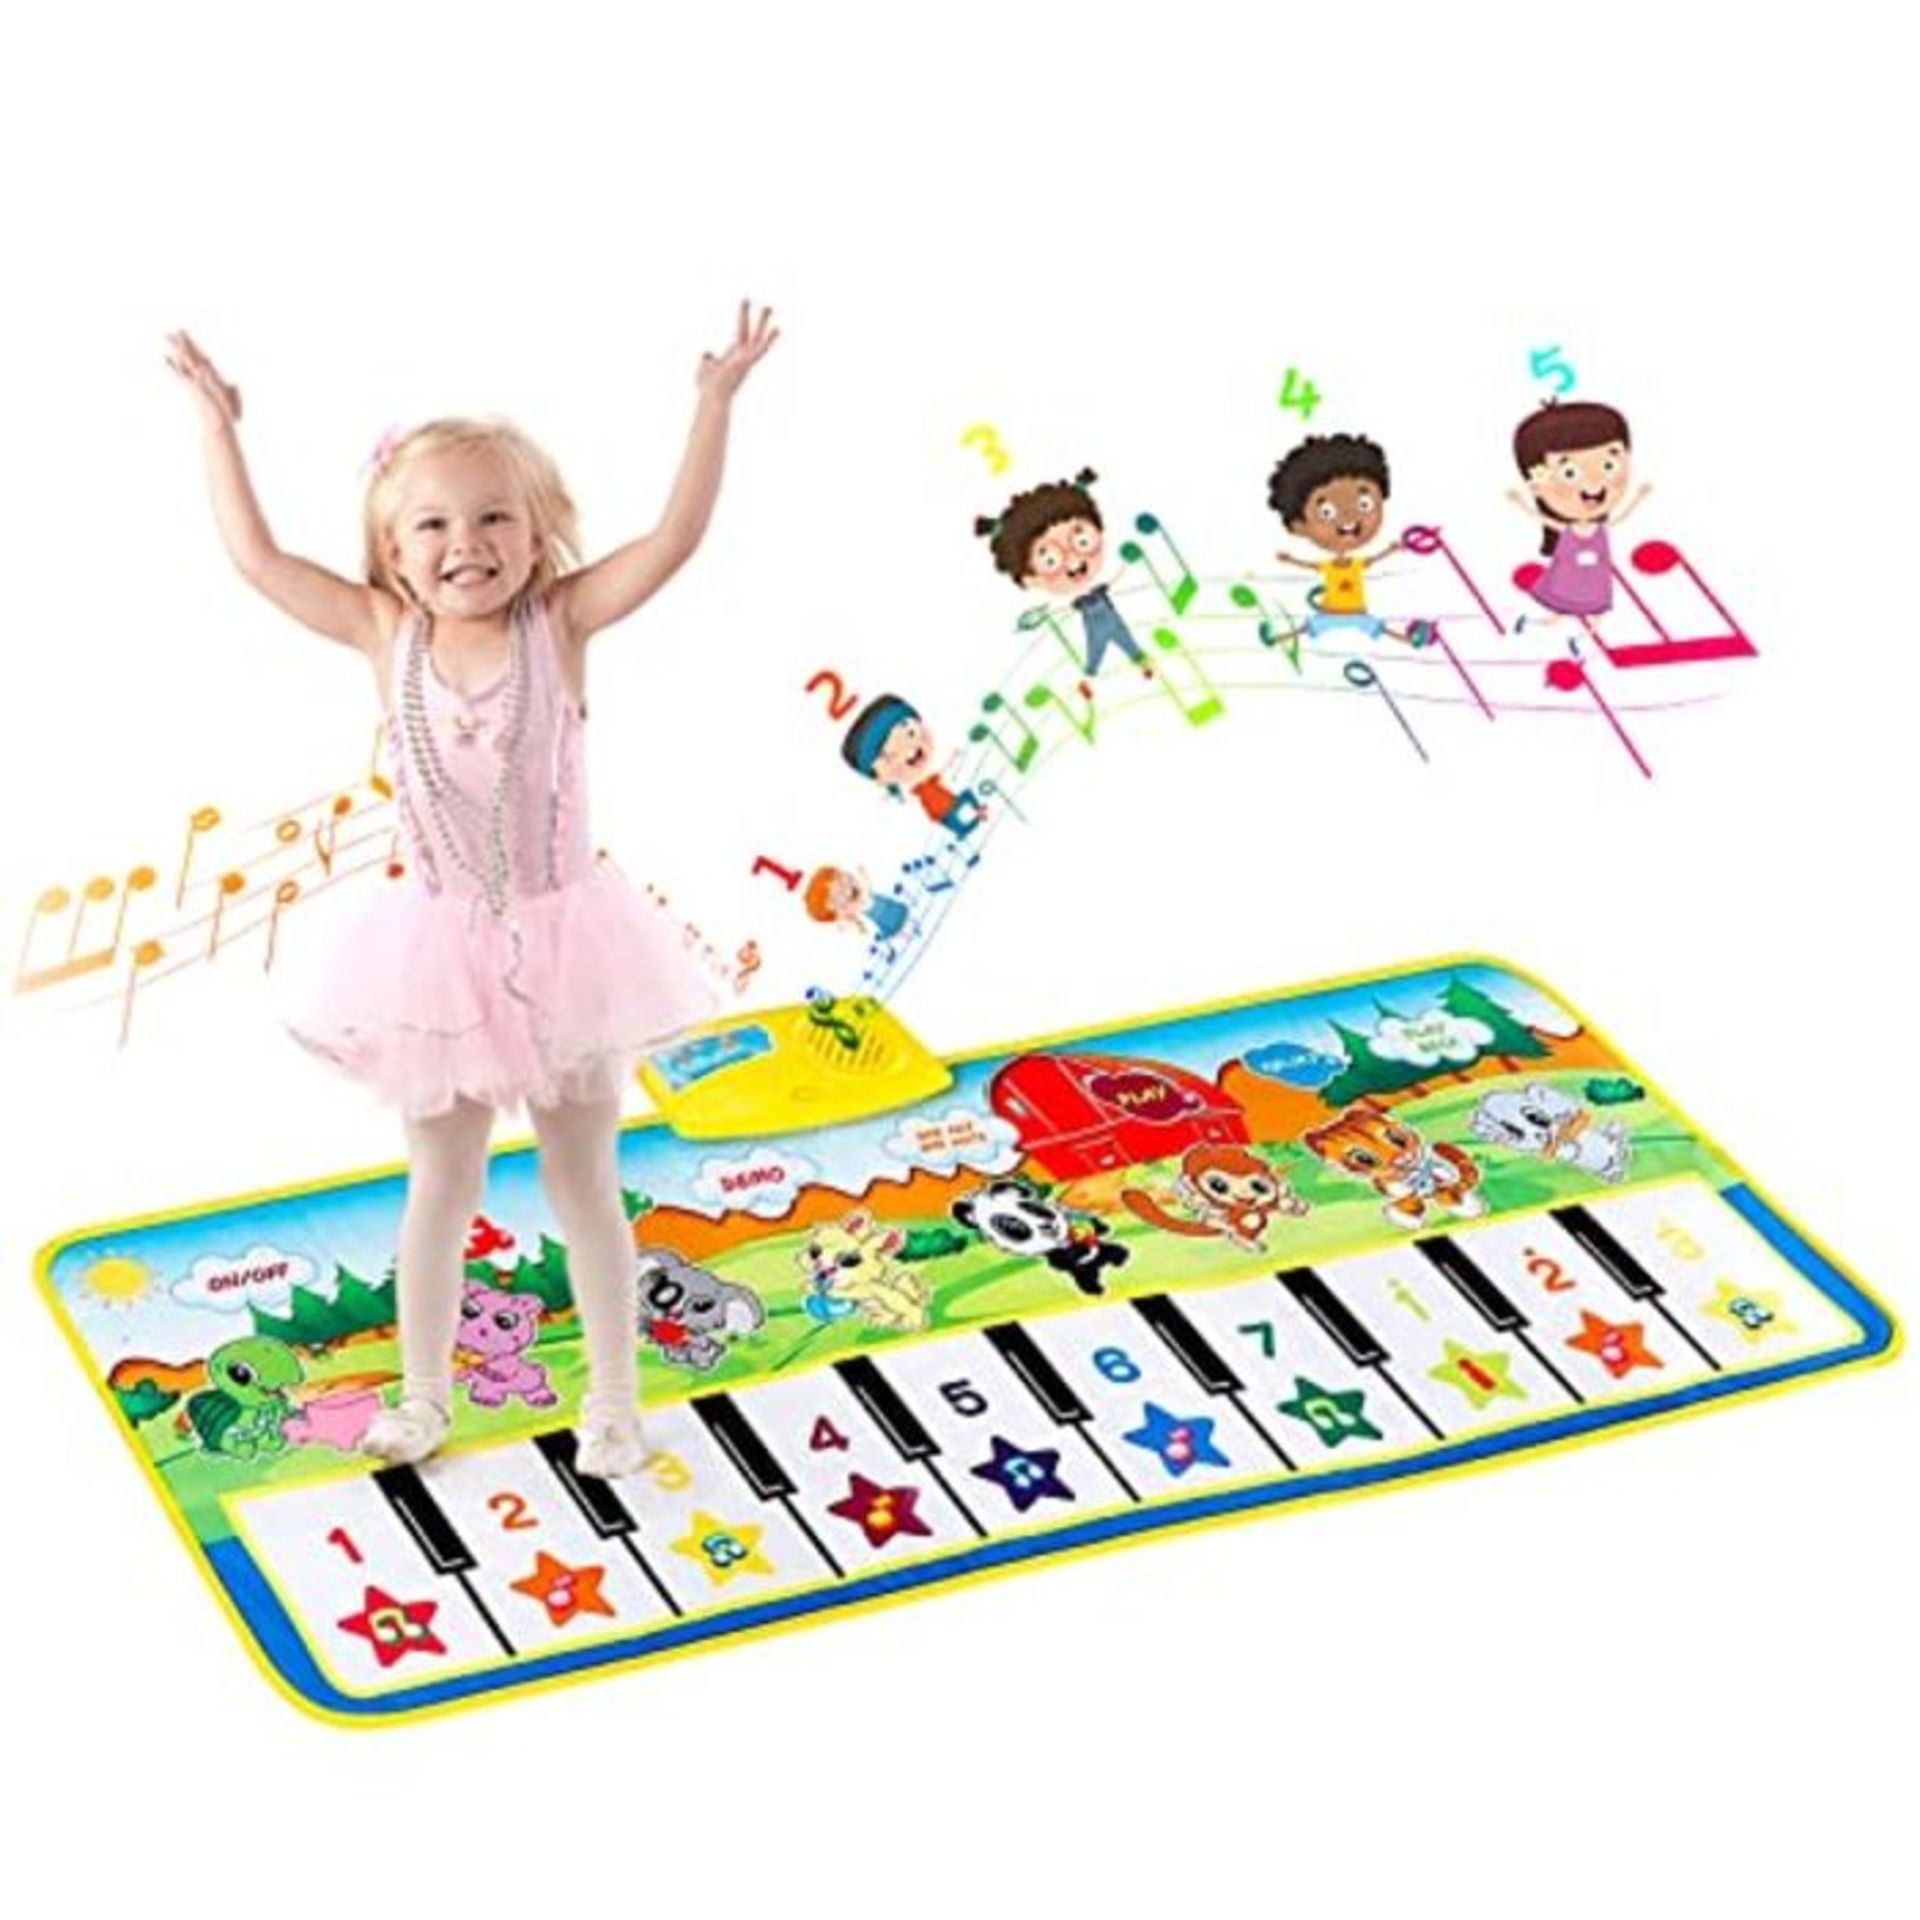 EXTSUD Piano Music Dance Mat, Multi-Function Piano Mat for Toddlers, Musical Toys Play